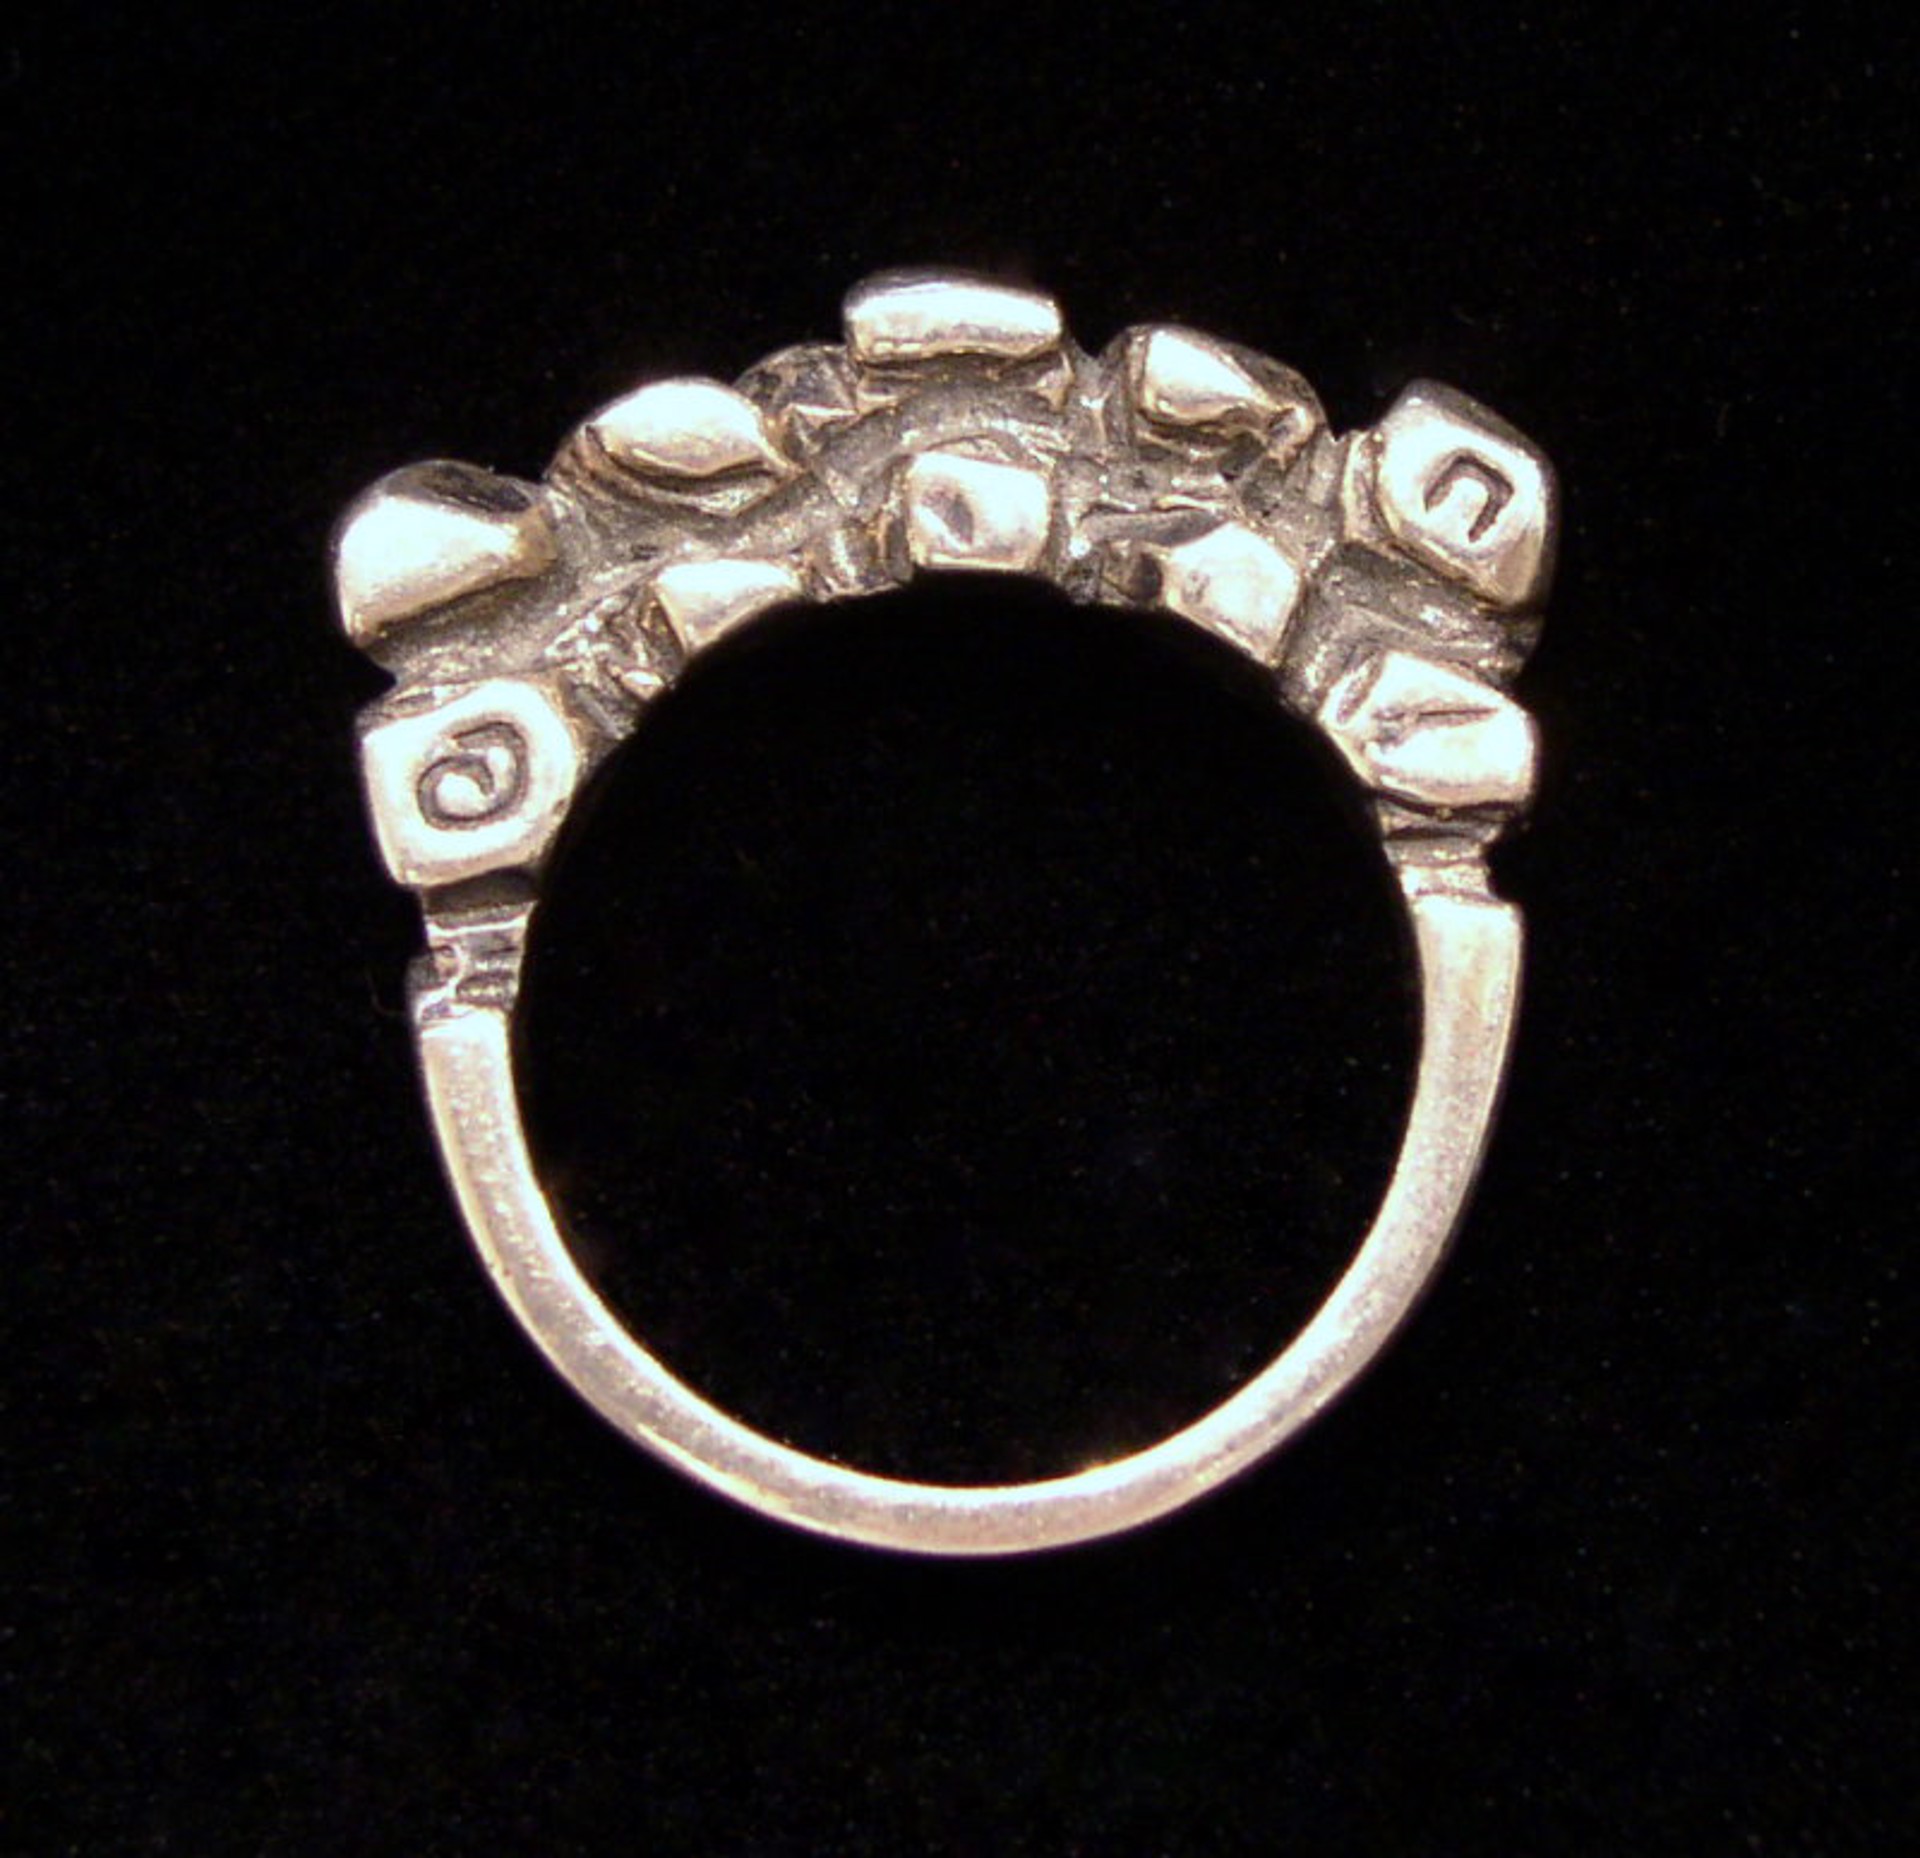 Rock Stacker Ring by Robert Rogers